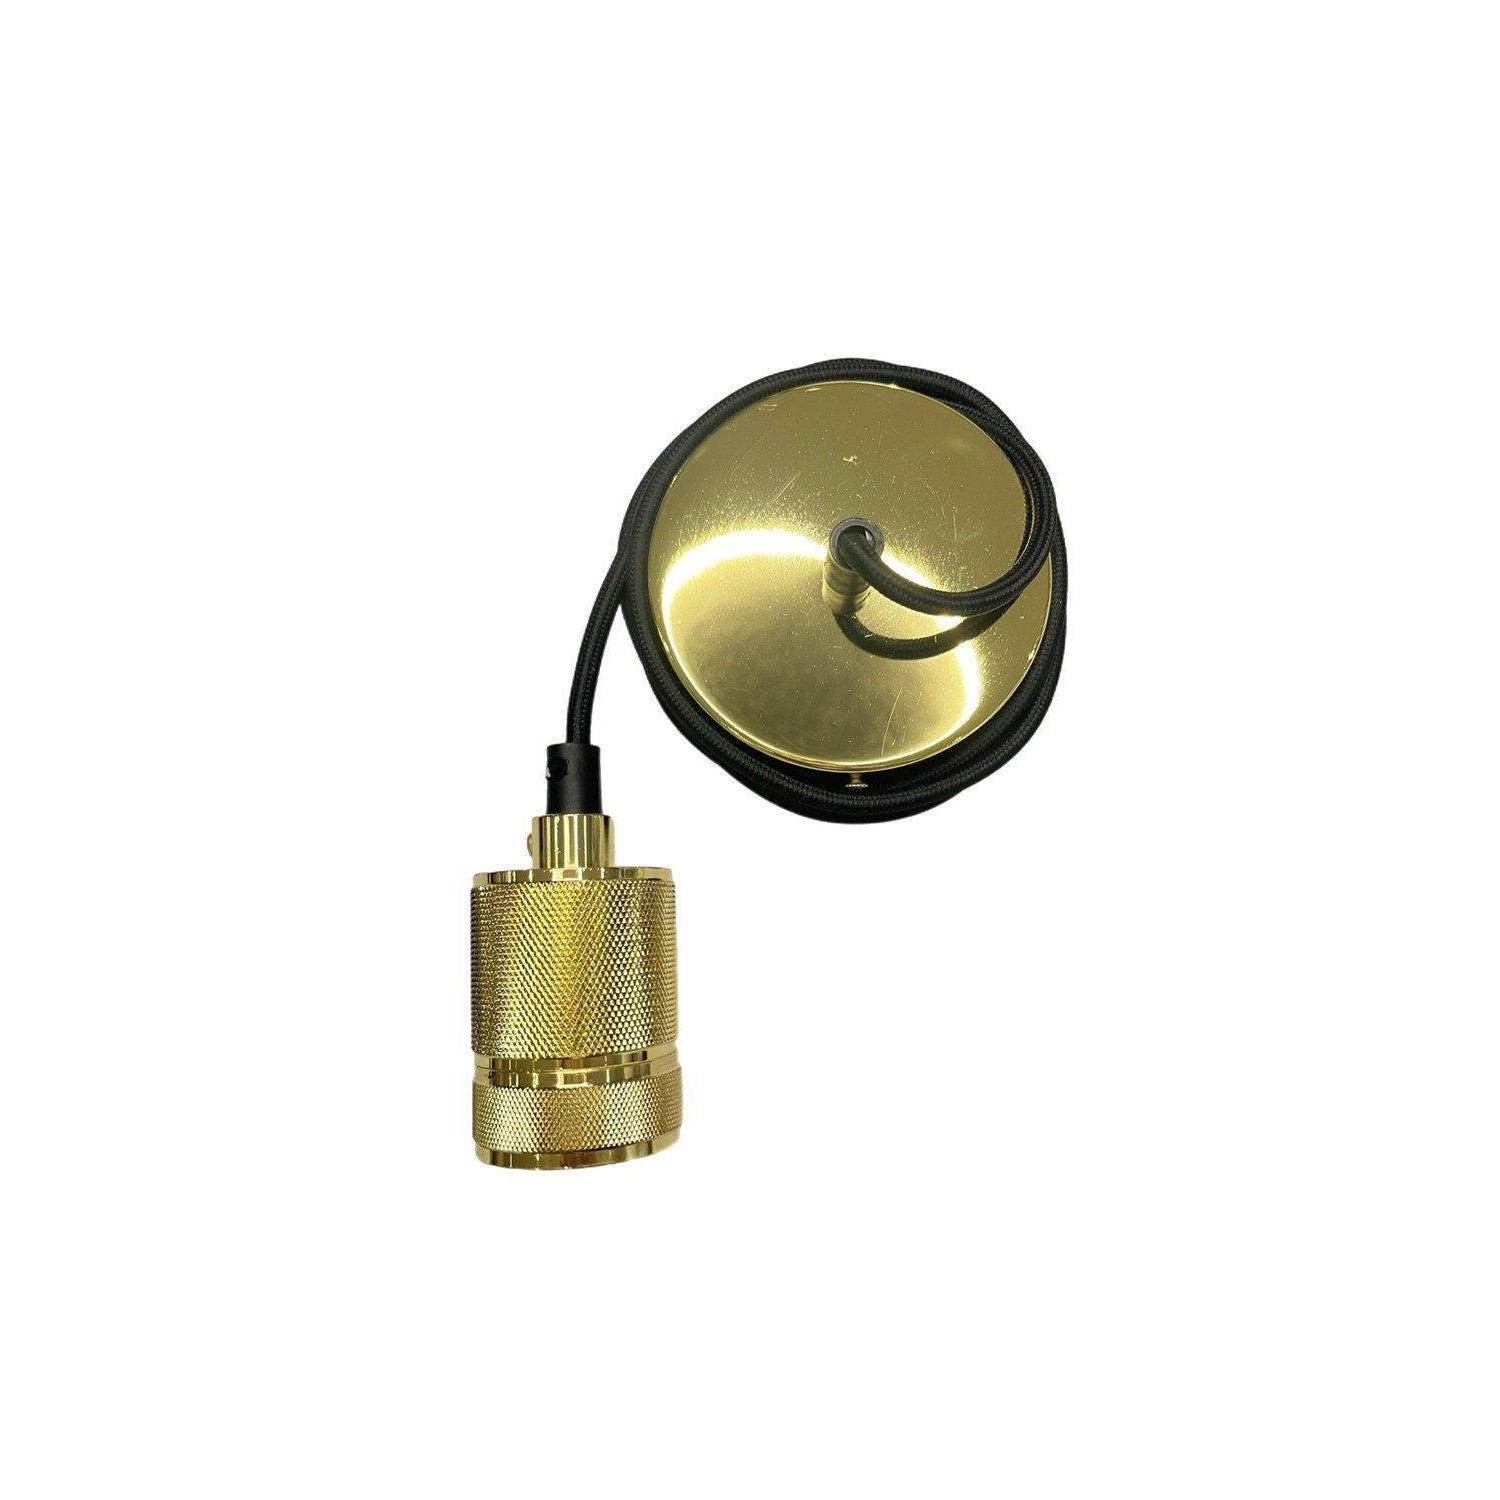 'Sydney' Gold Knurled Single Band 1.5m adjustable E27 Ceiling Pendant and Matching ceiling Rose - image 1